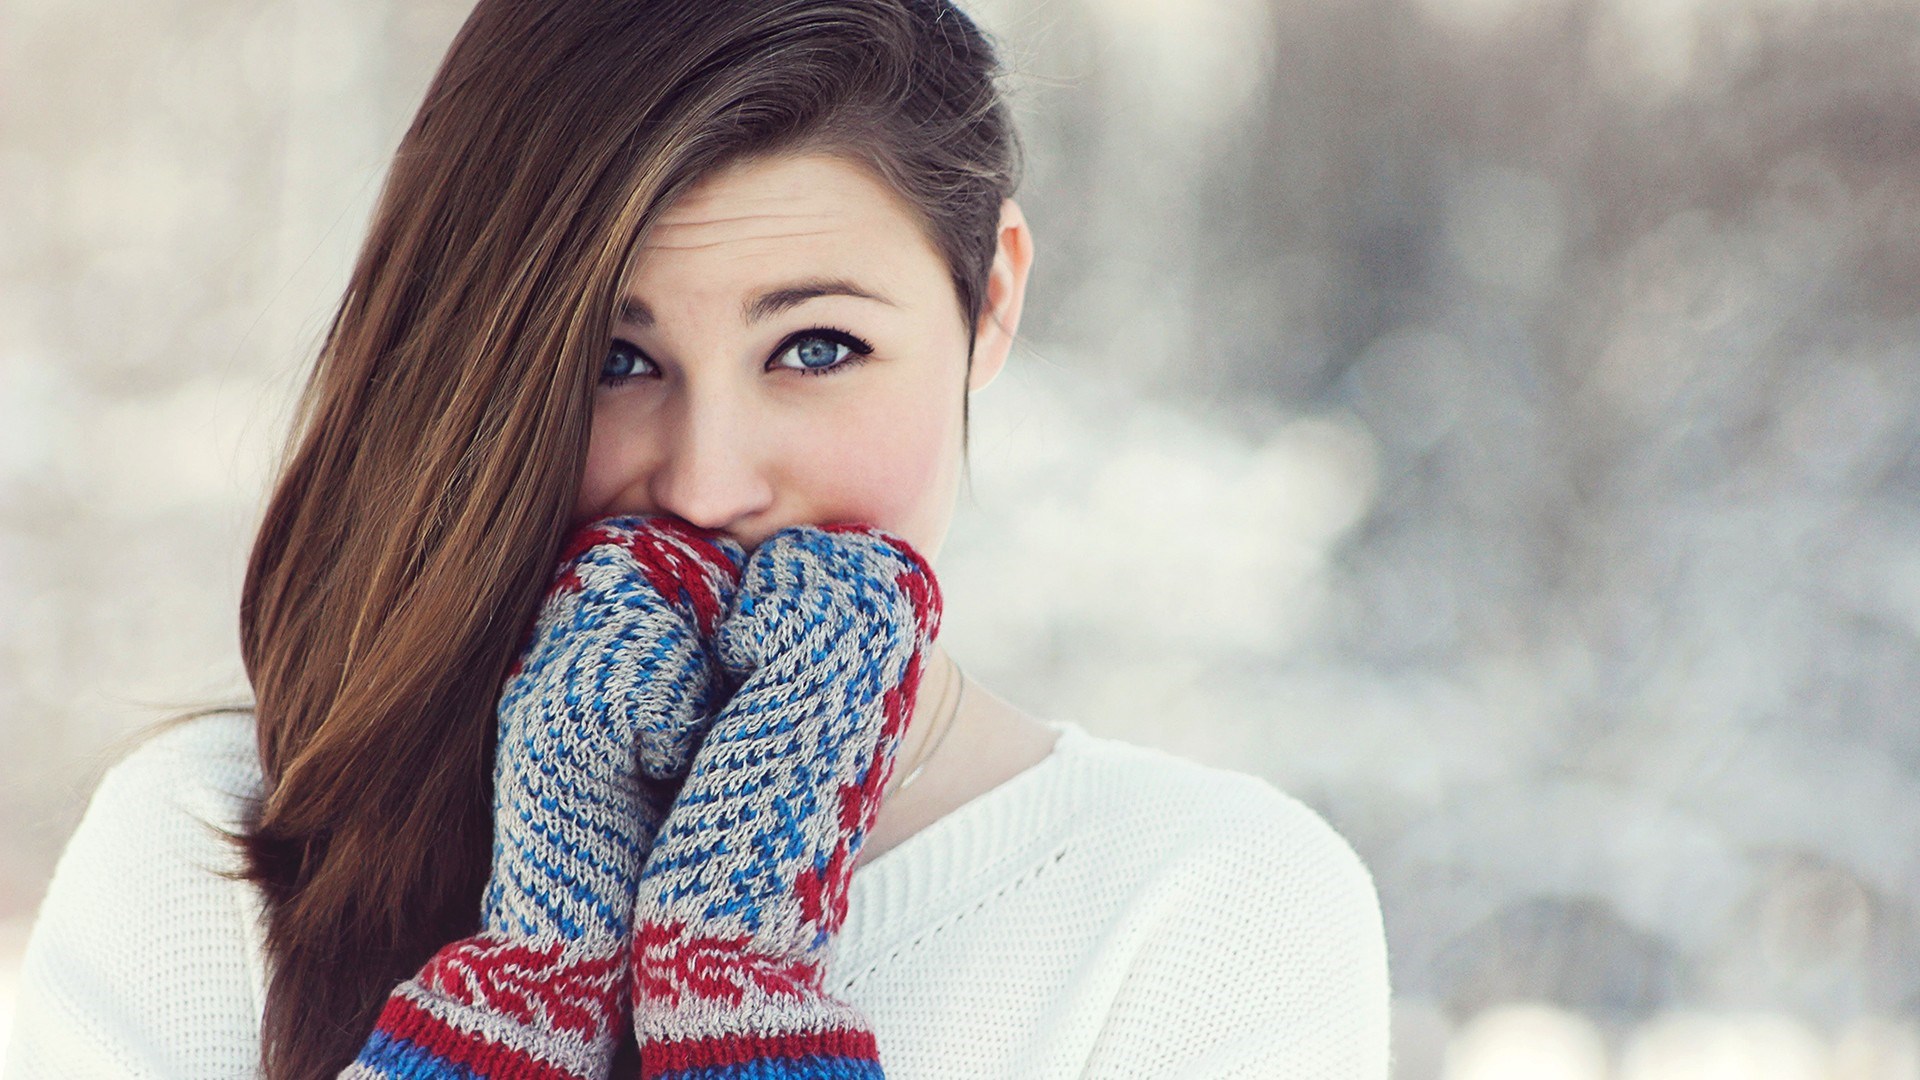 Winter Girls Dpz 4K Wallpapers HD Pictures – OneHDWallpapers.com